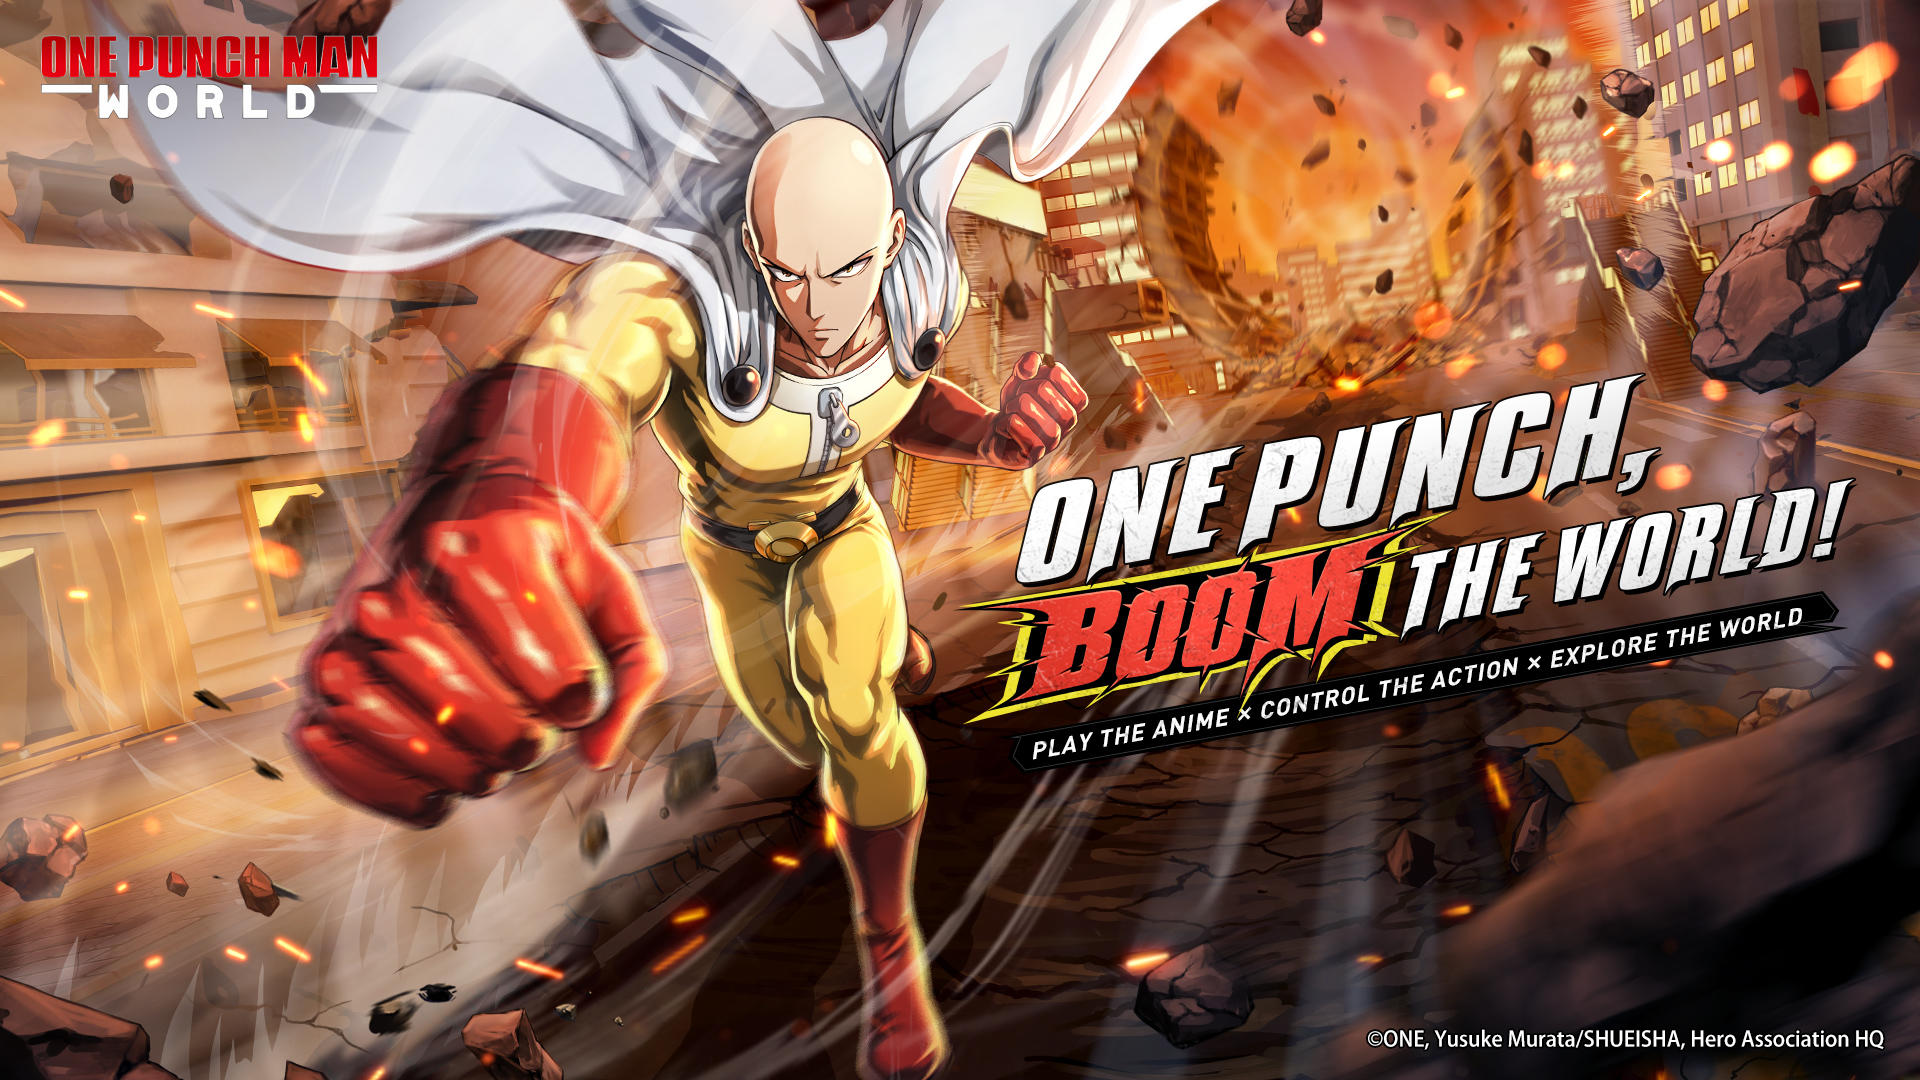 One Punch Man Season 3 Announced With A Poster